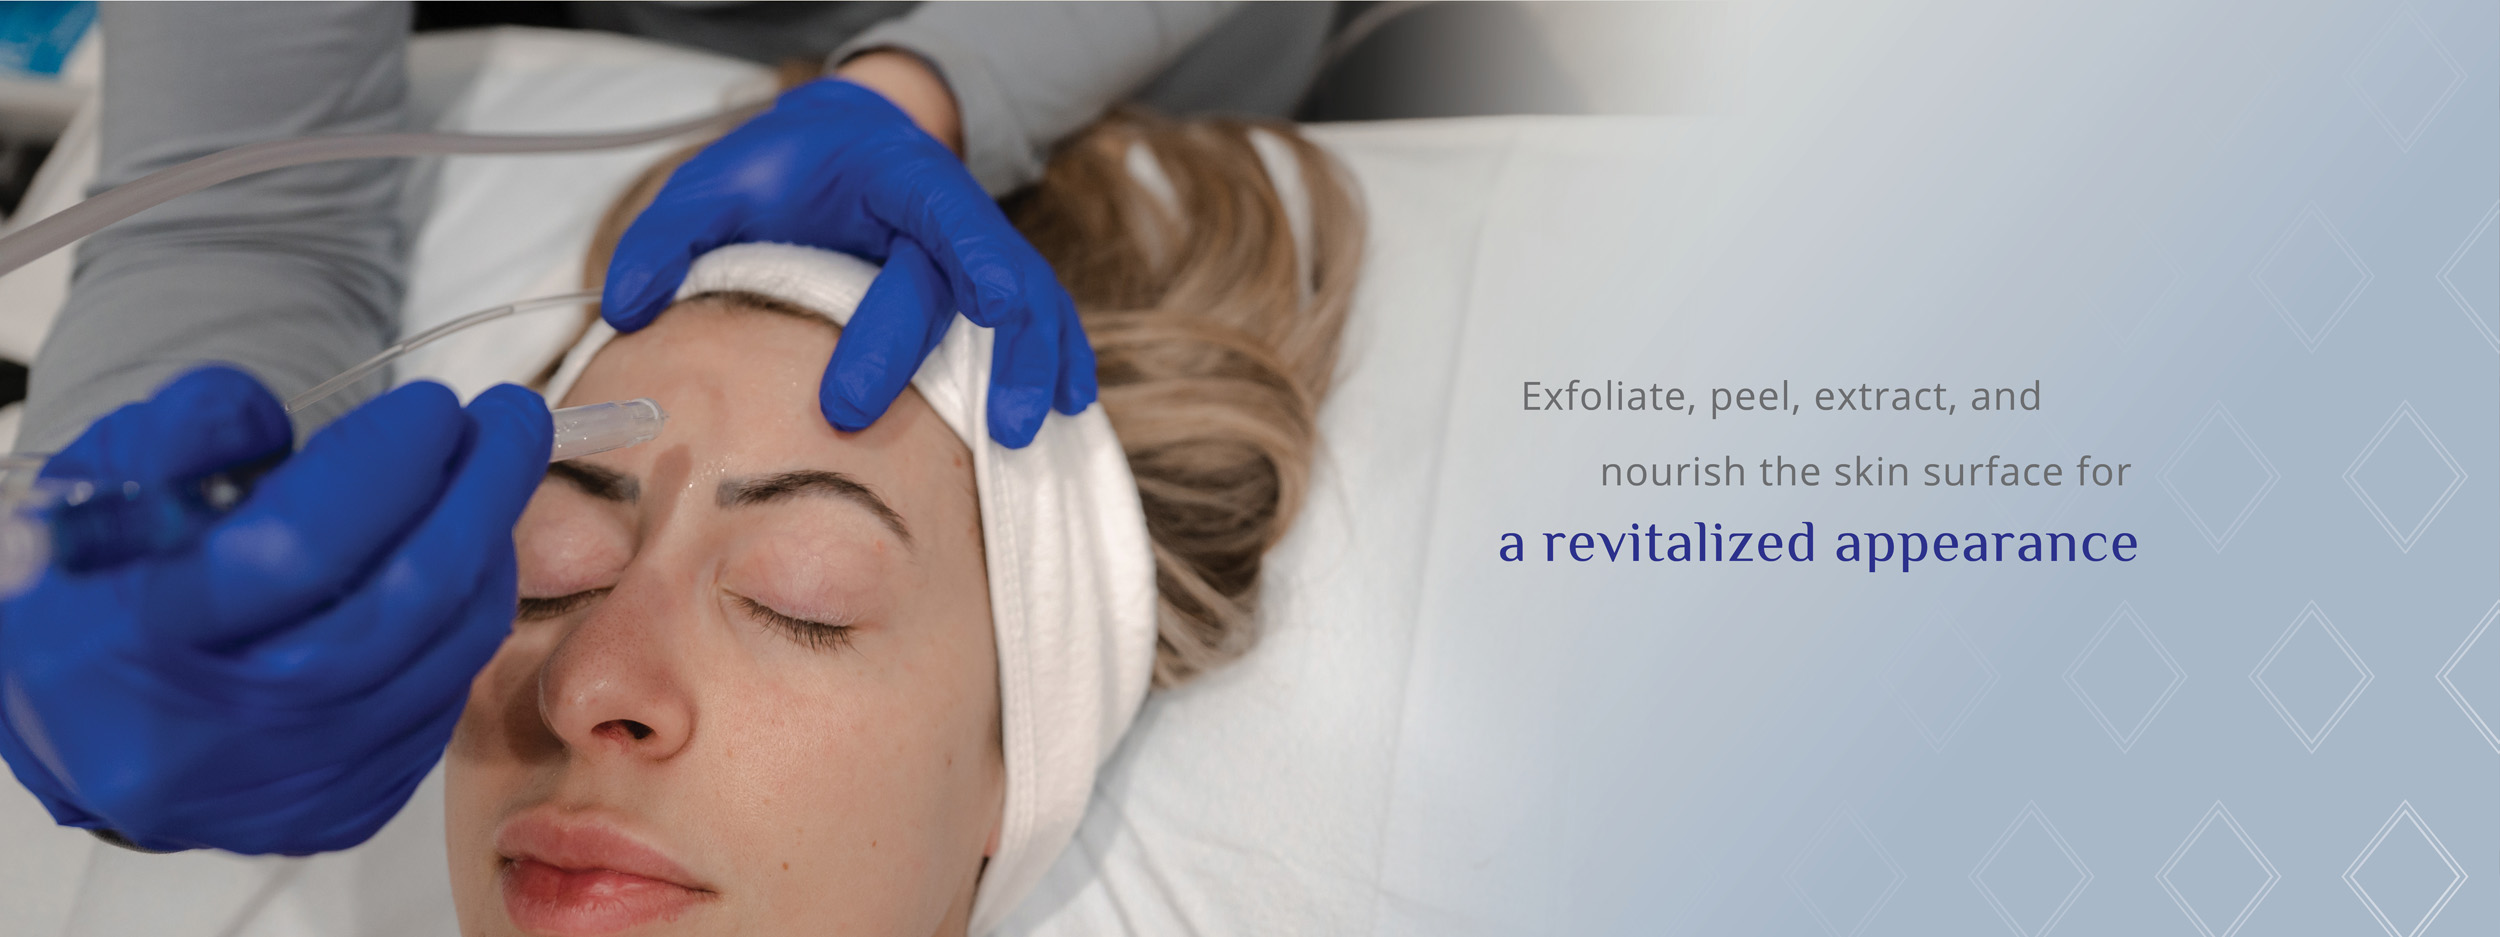 Exfoliate, peel, extract, and nourish the skin surface with Facials & Peels from NeoSkin Medical Spa in Hudson Ohio